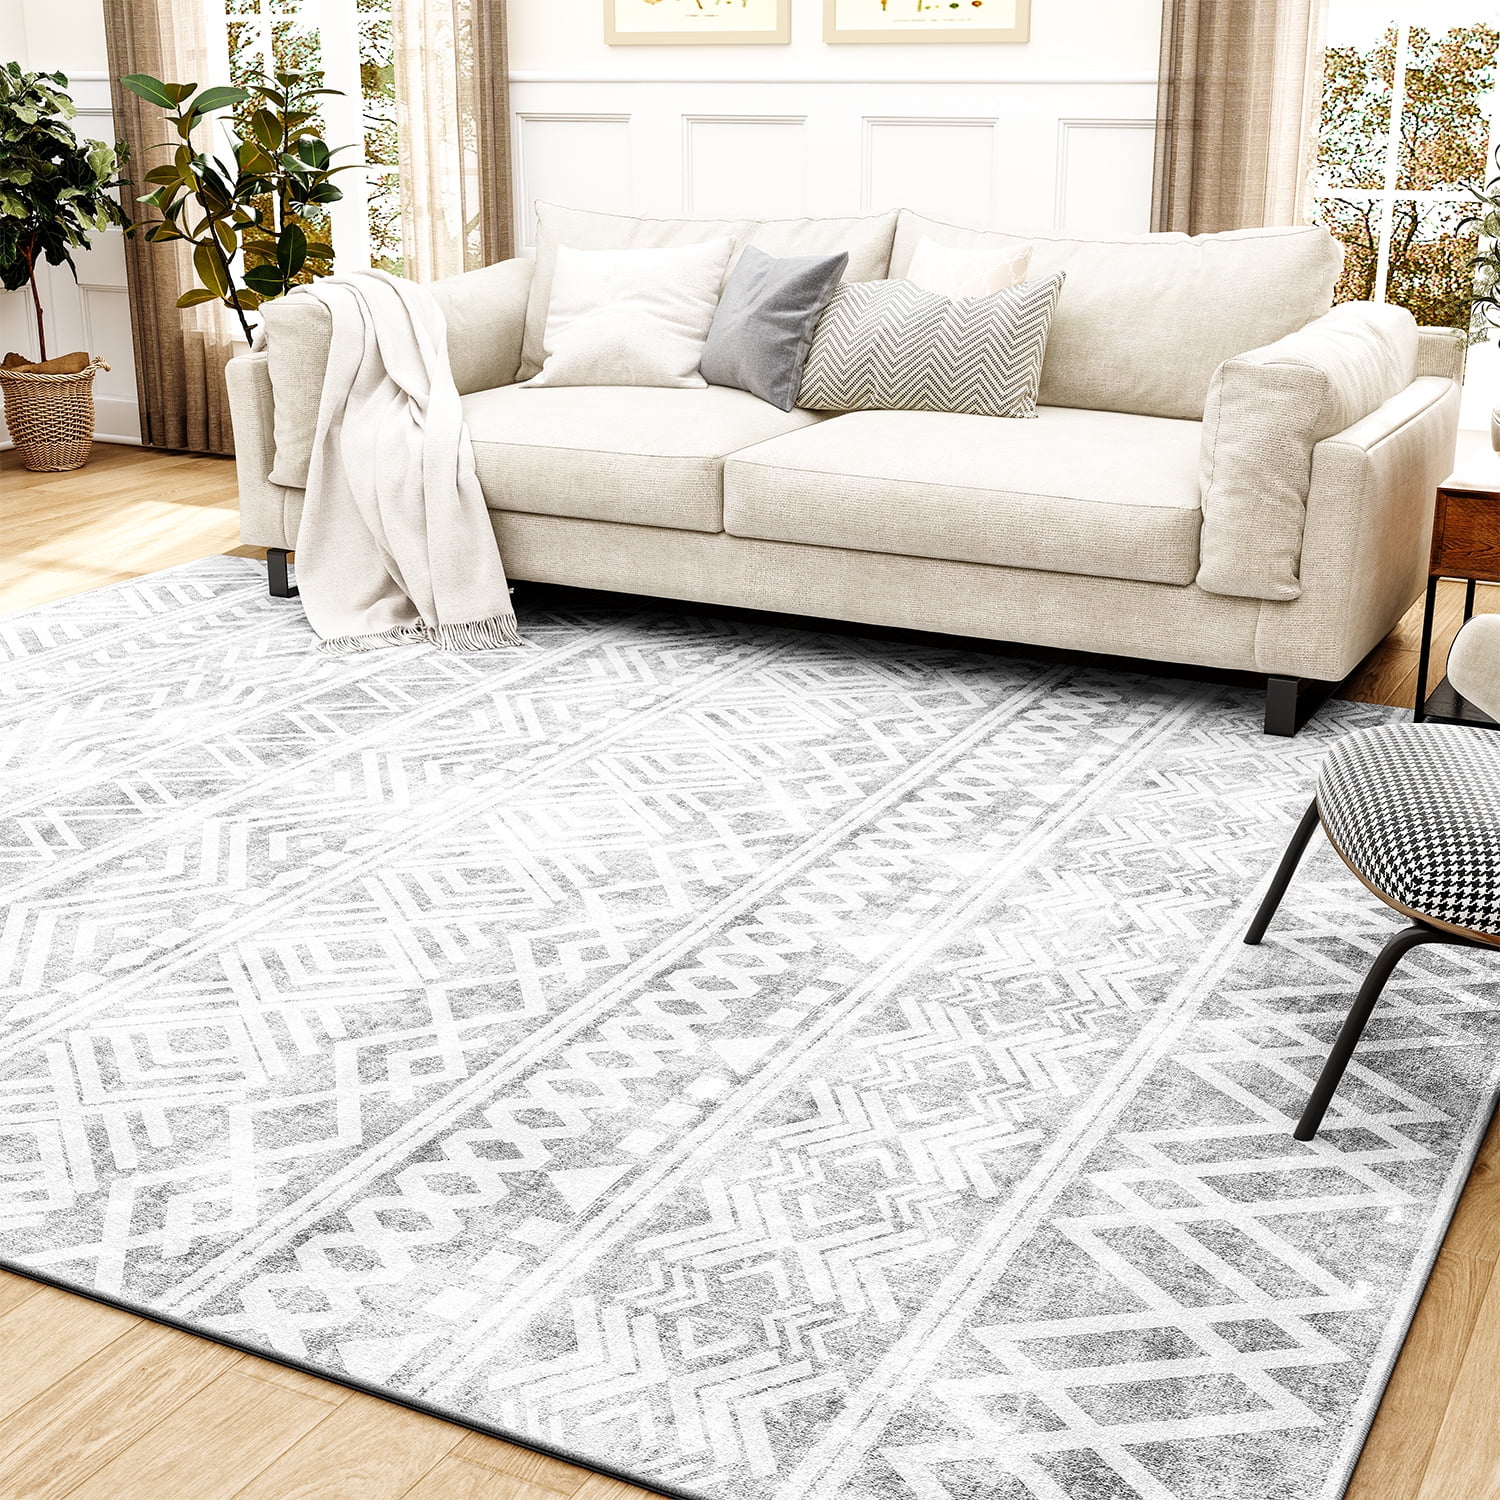 Sixhome 3'x5' Area Rugs Washable Rugs for Living Room Boho Area Rug Modern Geometric Neutral Carpets and Area Rugs for Home Decor Foldable Non Slip